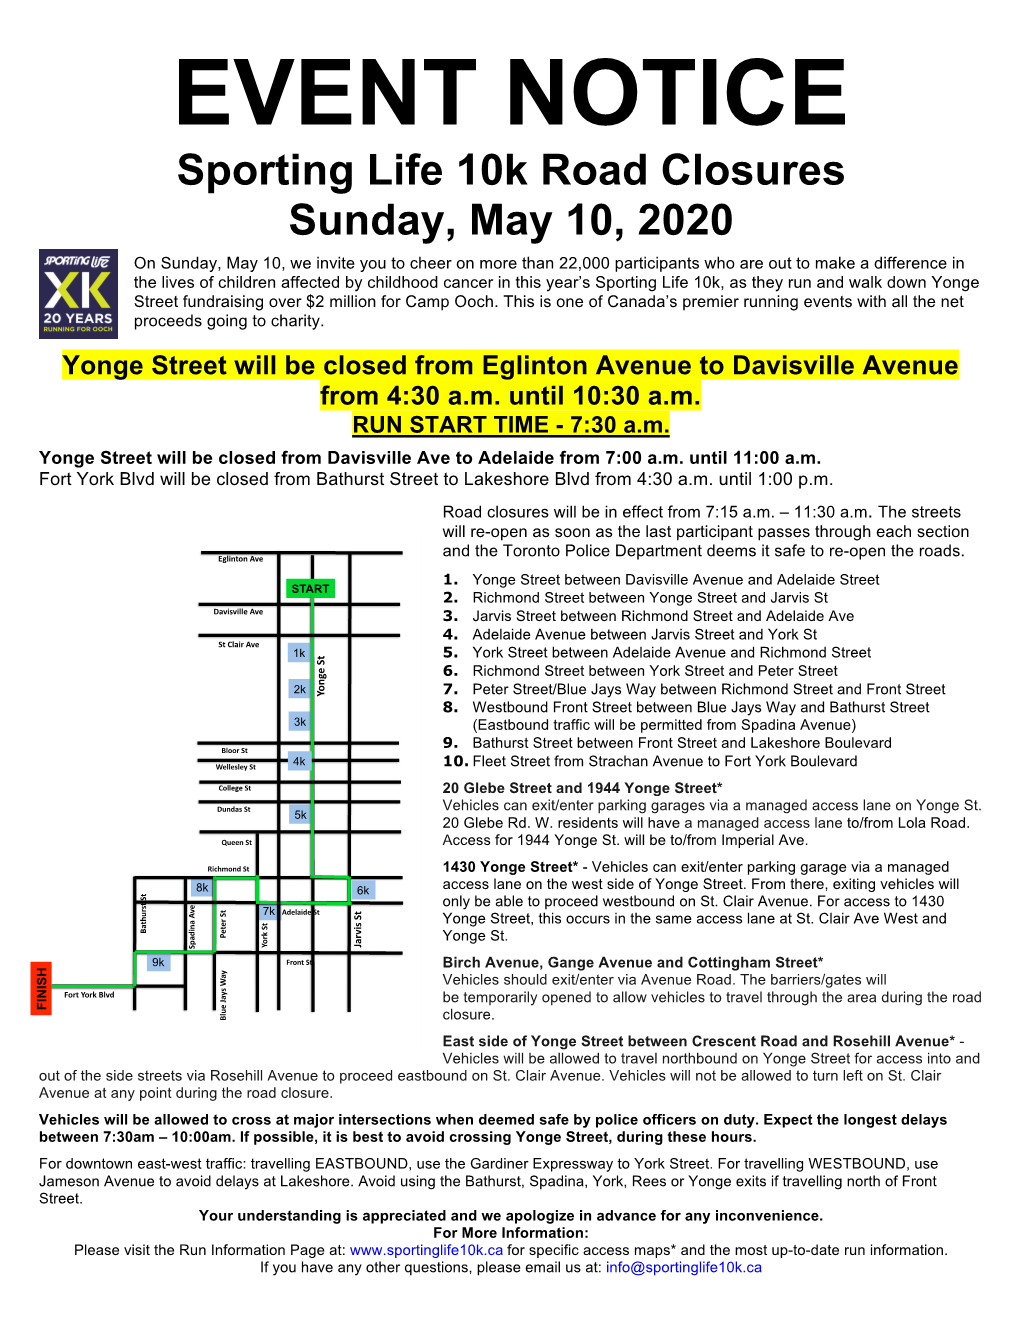 EVENT NOTICE Sporting Life 10K Road Closures Sunday, May 10, 2020